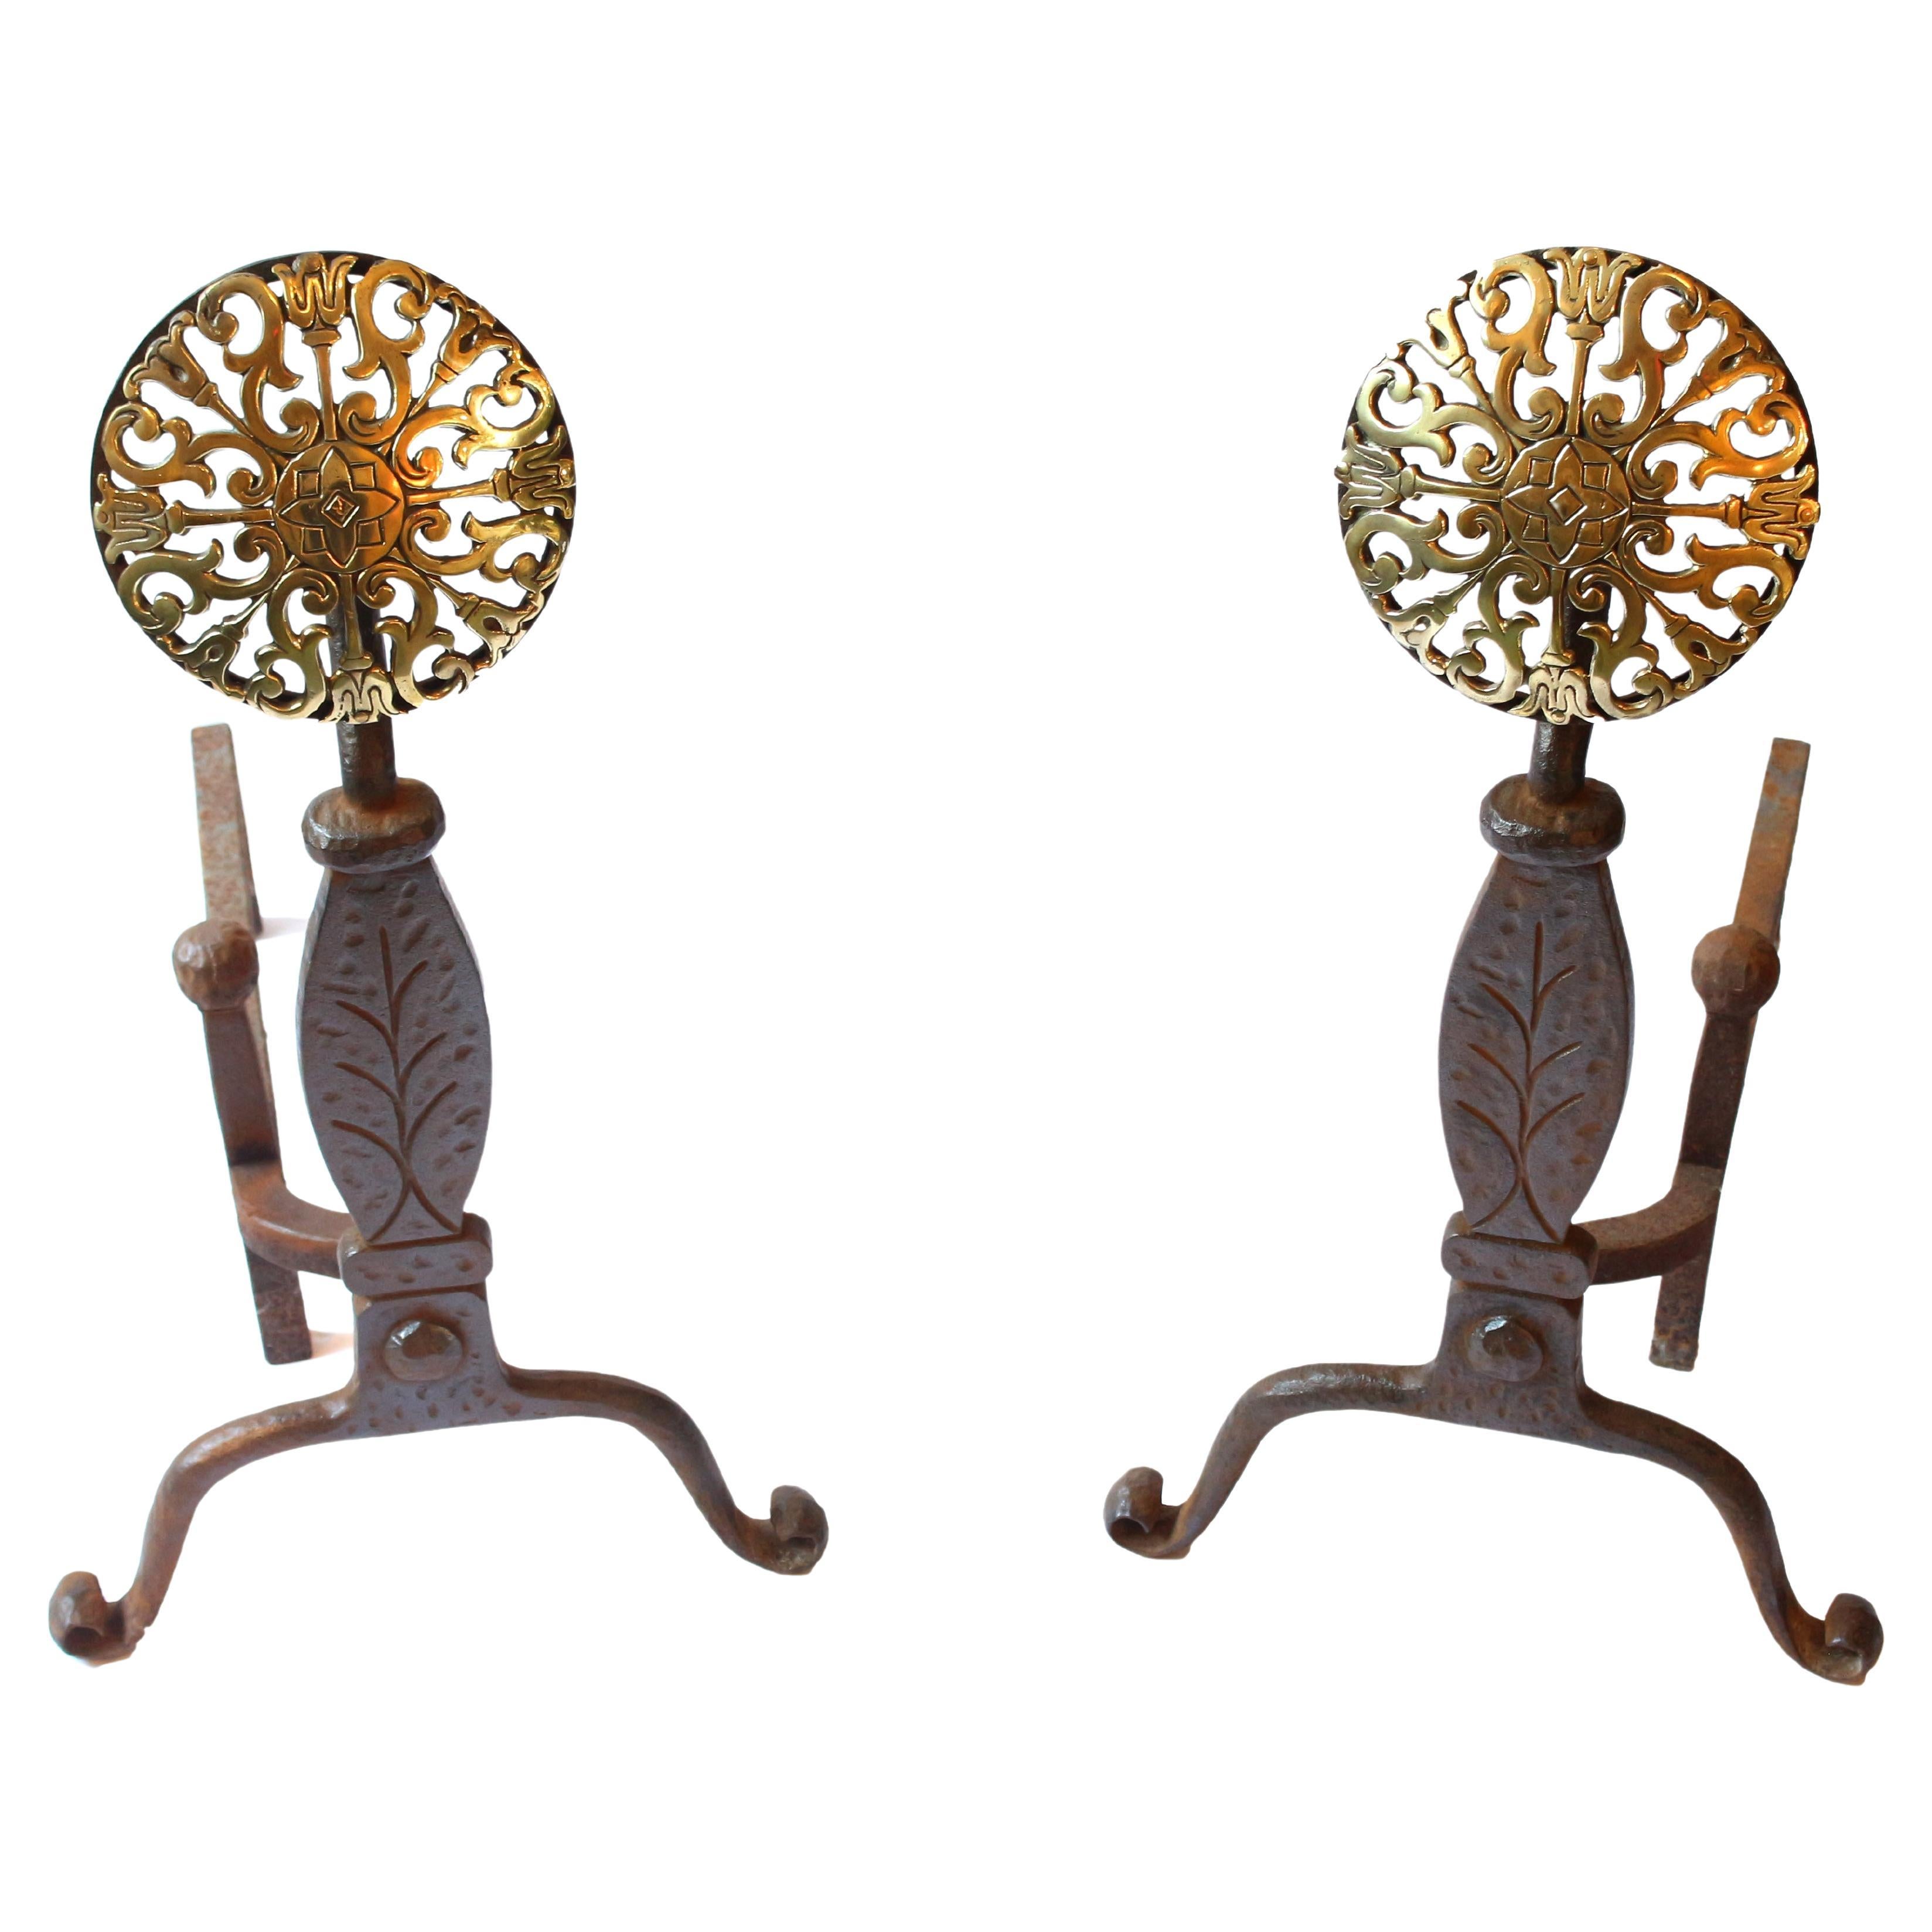 Circa 1950s Pair of Iron & Brass Andirons by Virginia Metalcrafters